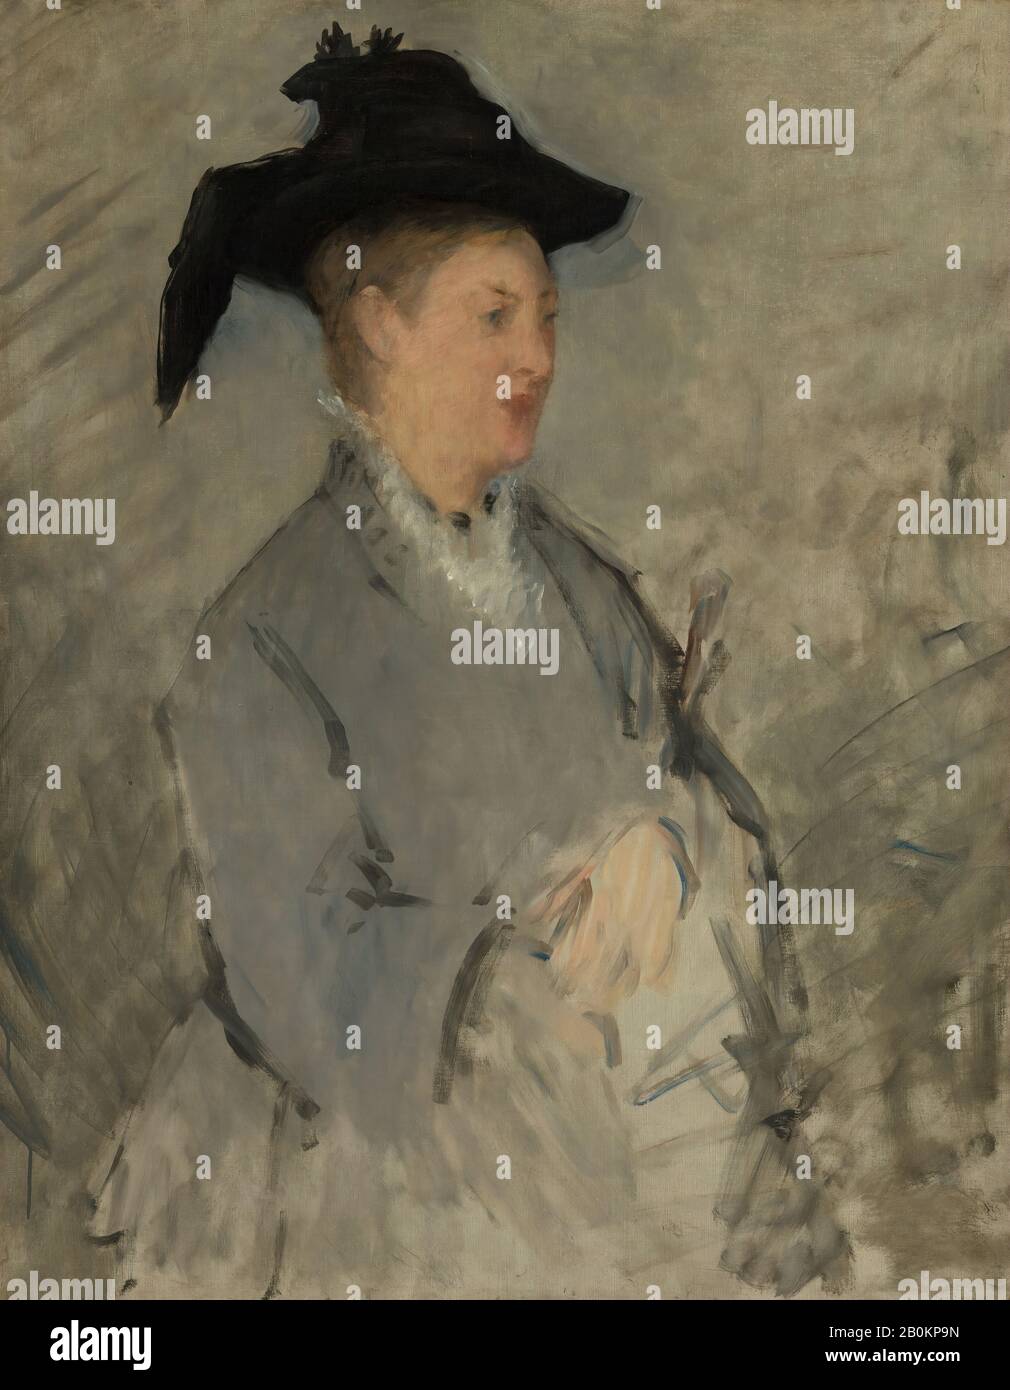 Edouard Manet, Madame Édouard Manet (Suzanne Leenhoff, 1830–1906), Edouard Manet (French, Paris 1832–1883 Paris), ca. 1873, Oil on canvas, 39 1/2 x 30 7/8 in. (100.3 x 78.4 cm), Paintings Stock Photo